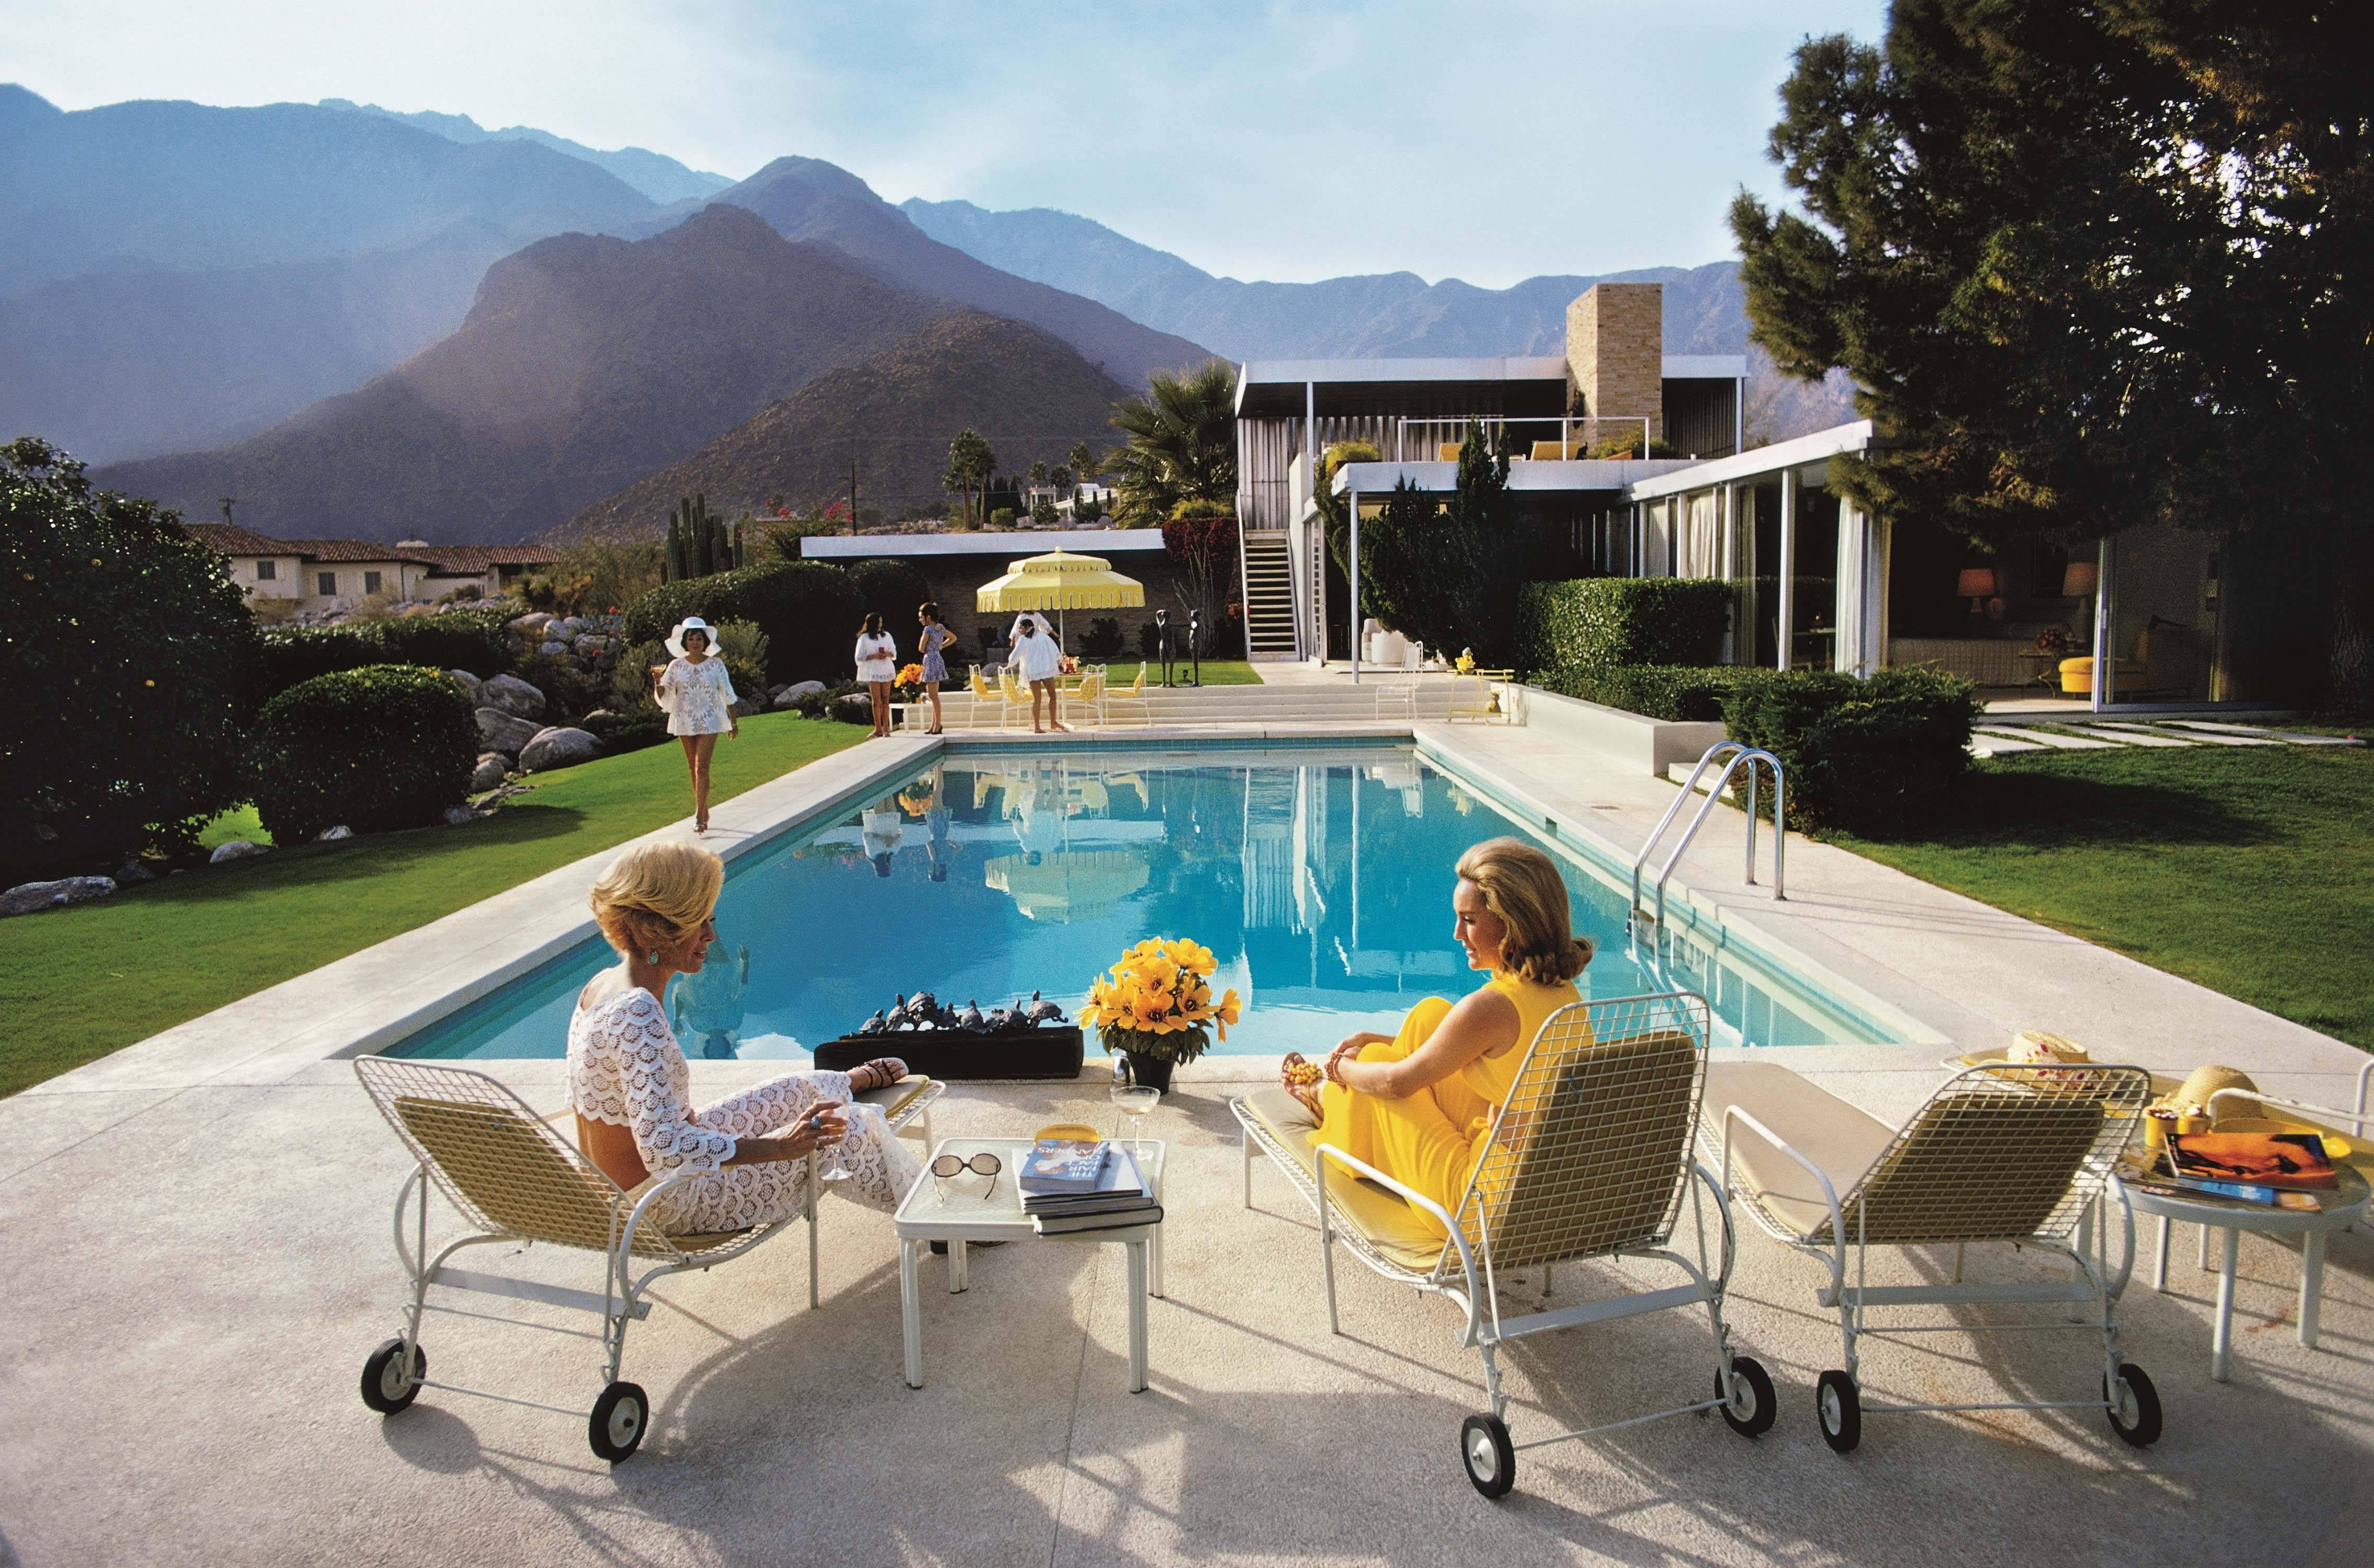 Lita Baron, Nelda Linsk, Helen Dzo Dzo at the Richard Neutra-designed house of Edgar Kaufman
Premium quality photographic prints from the Slim Aarons Archive. All photographs are printed and authorised by the Getty Images Gallery, London.

This